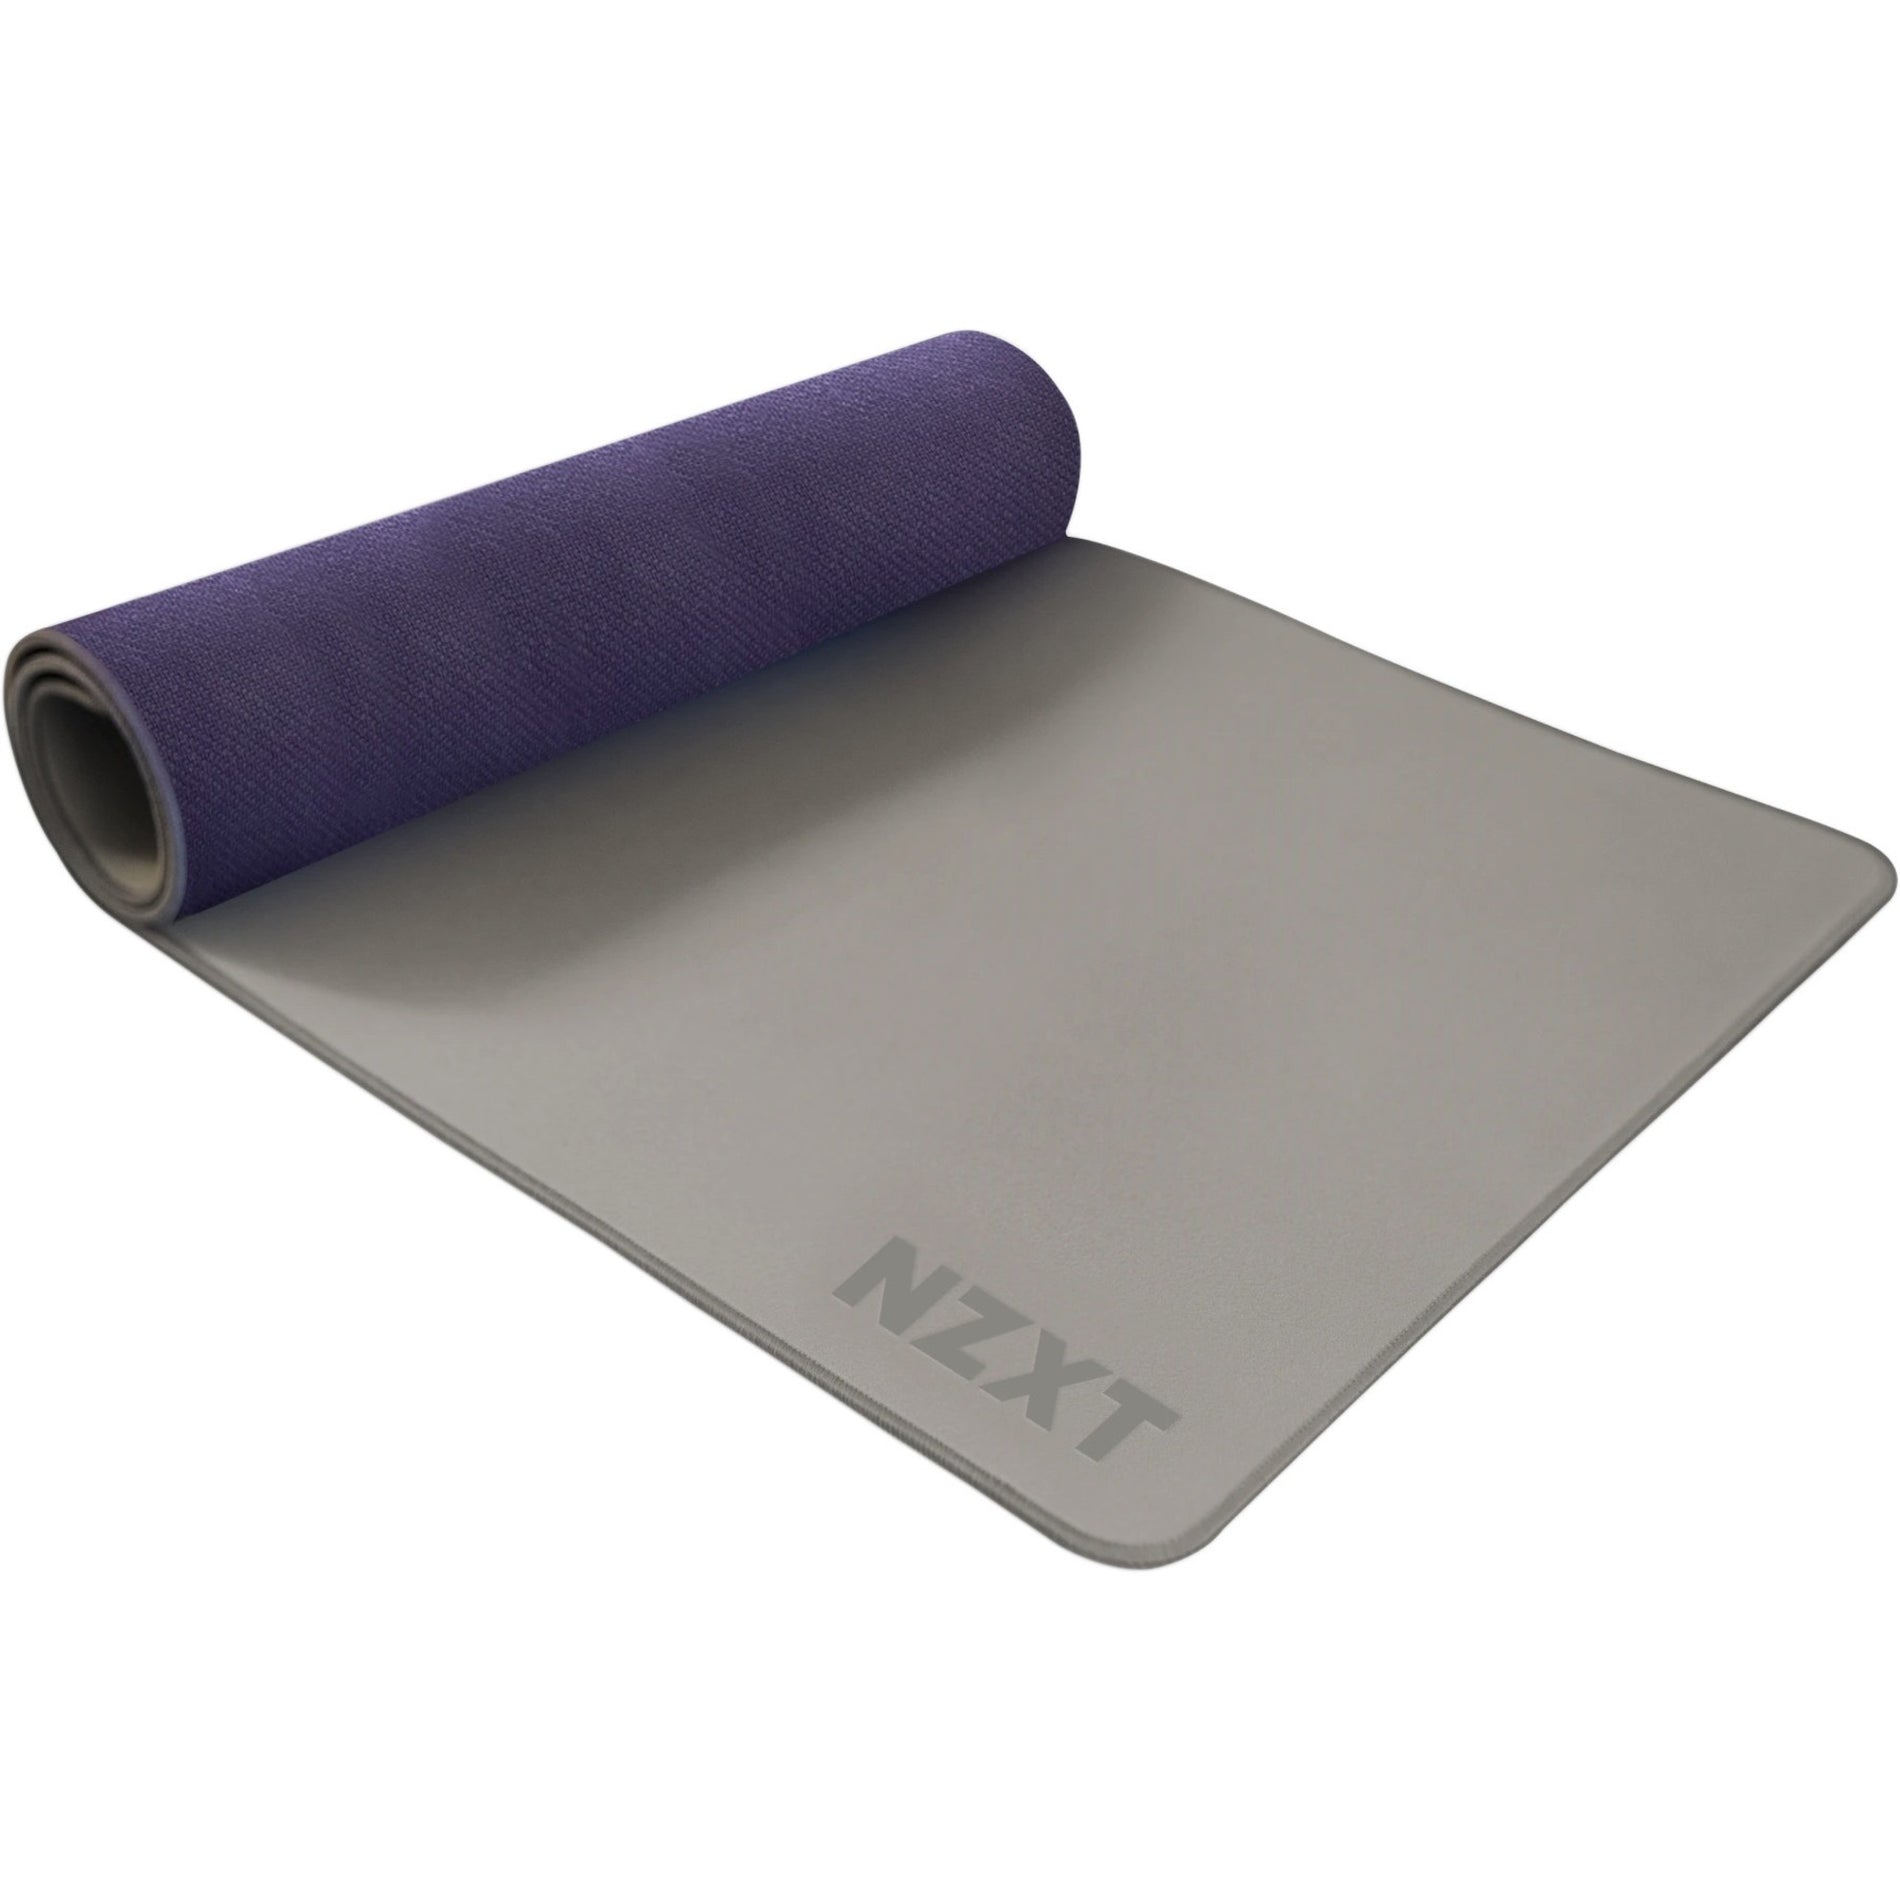 NZXT MM-MXLSP-GR MXP700 Mid-Size Extended Mouse Pad, Stain Resistant Gaming Mouse Pad